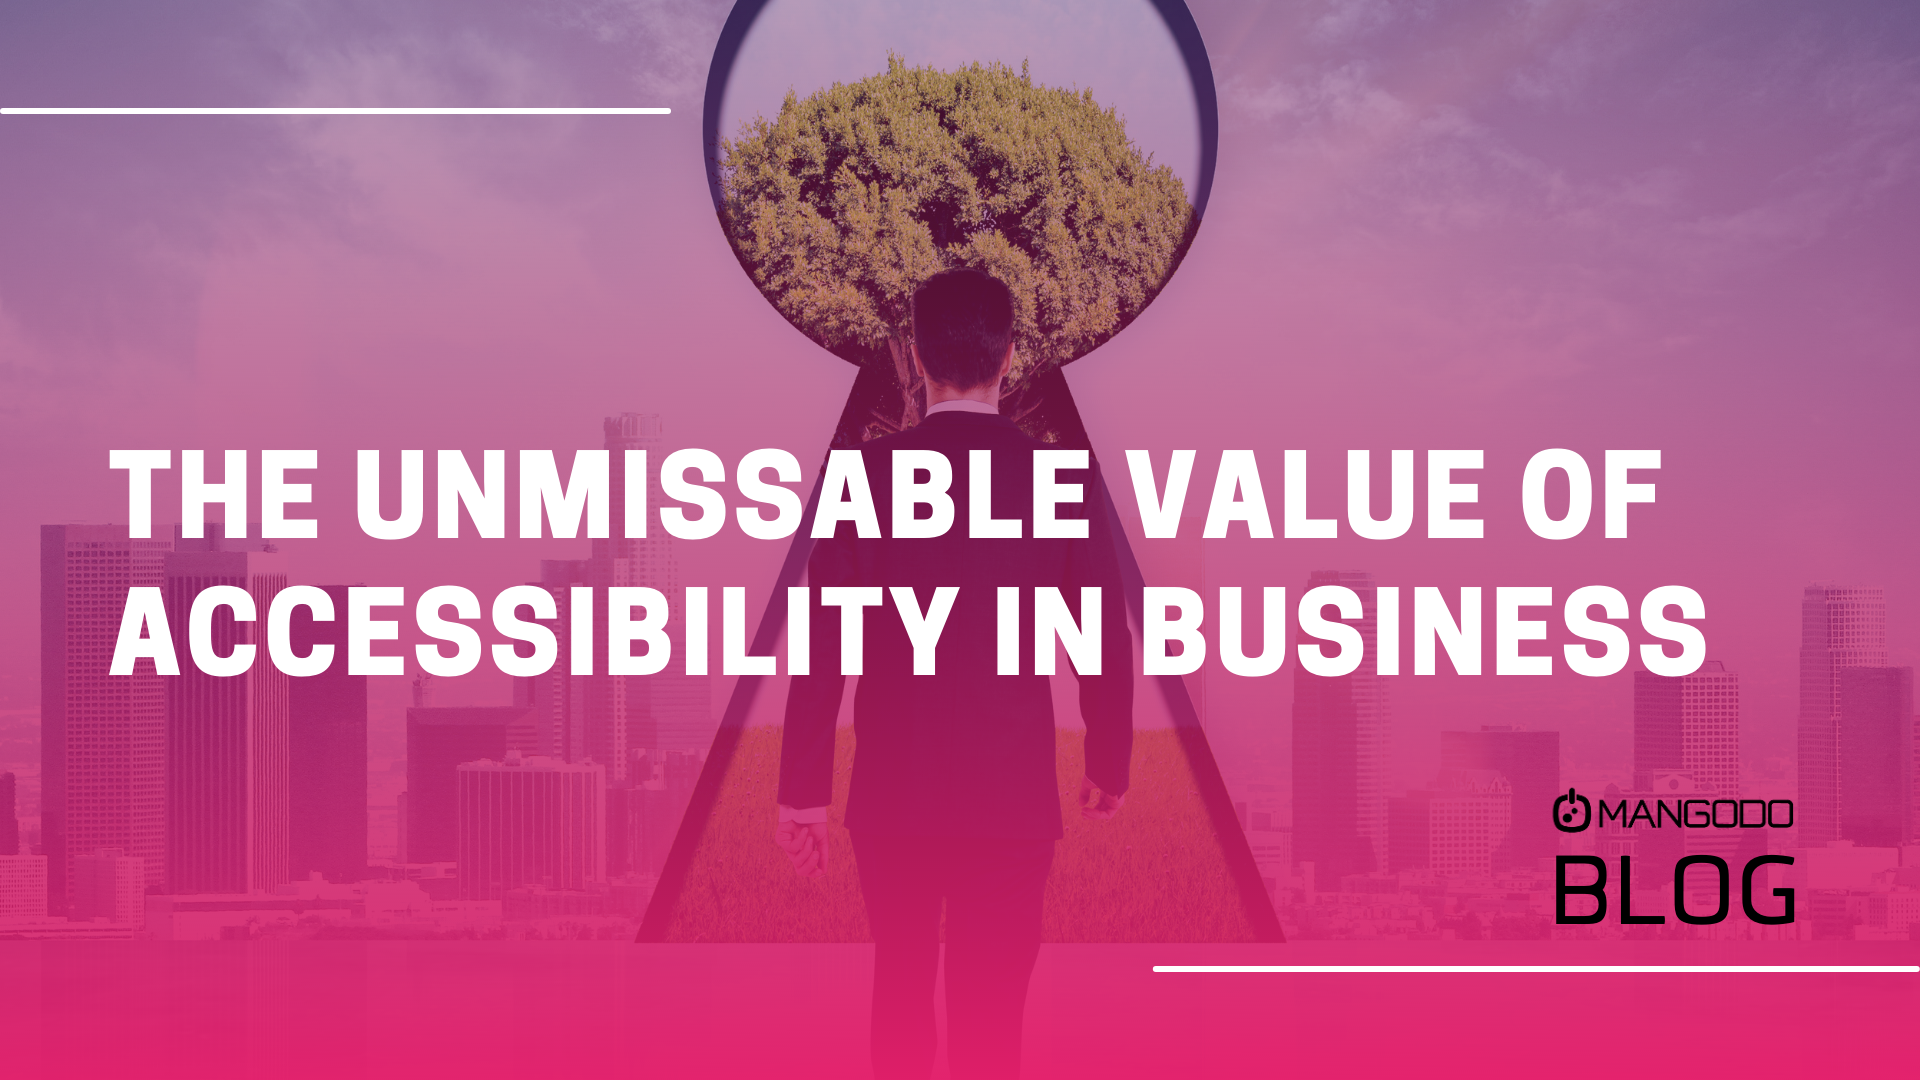 The Unmissable Value of Accessibility in Business